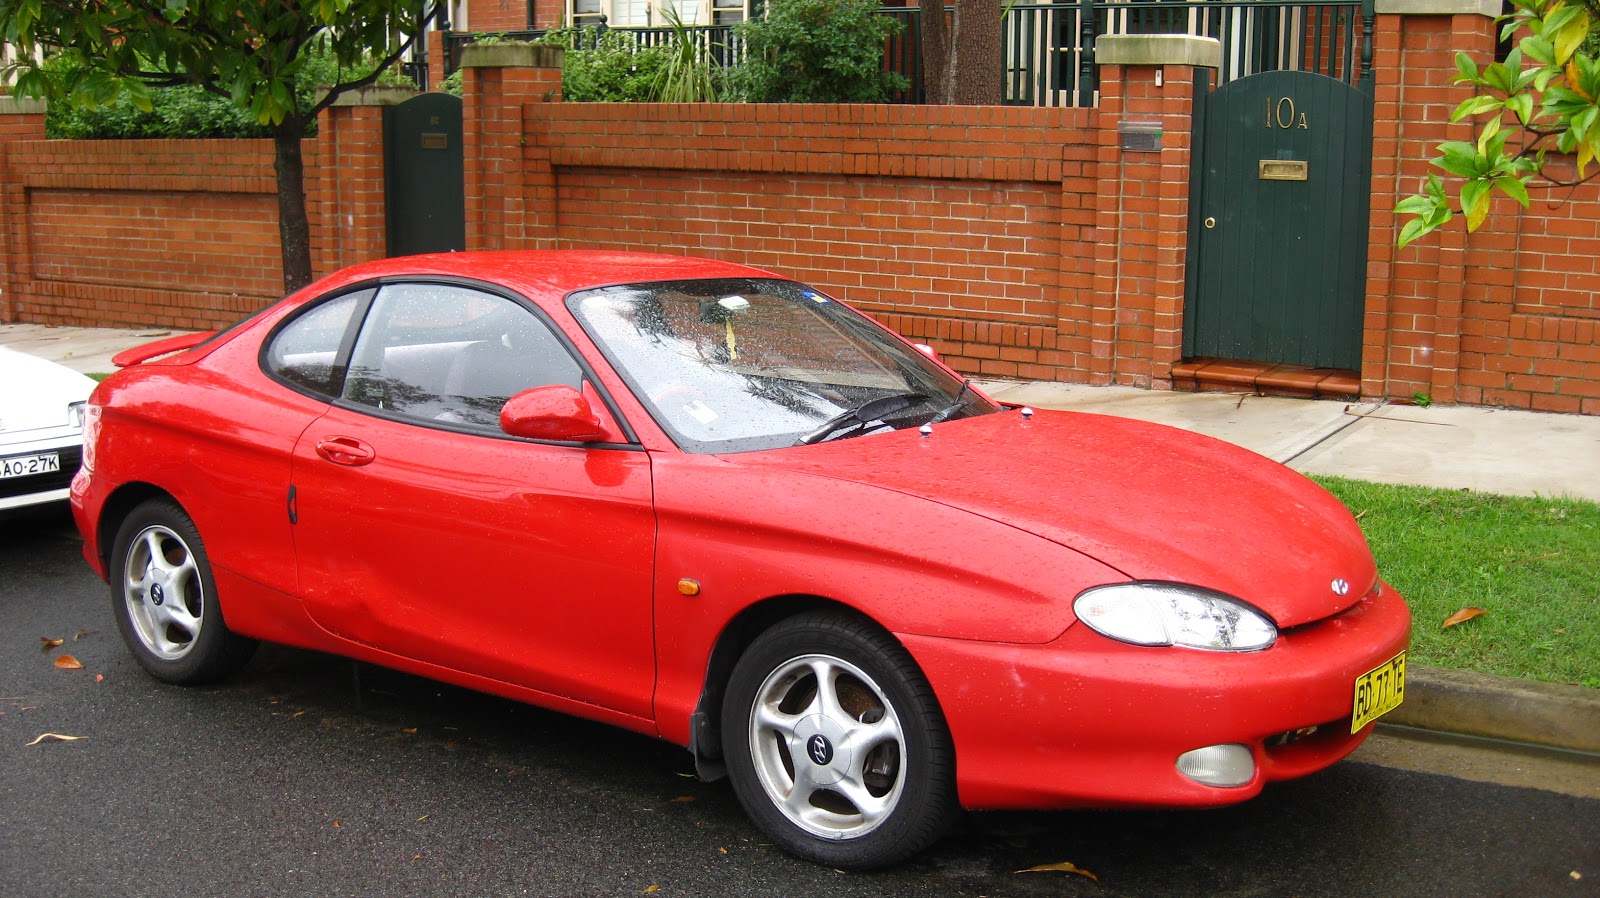 Aussie Old Parked Cars 1996 Hyundai Coupe